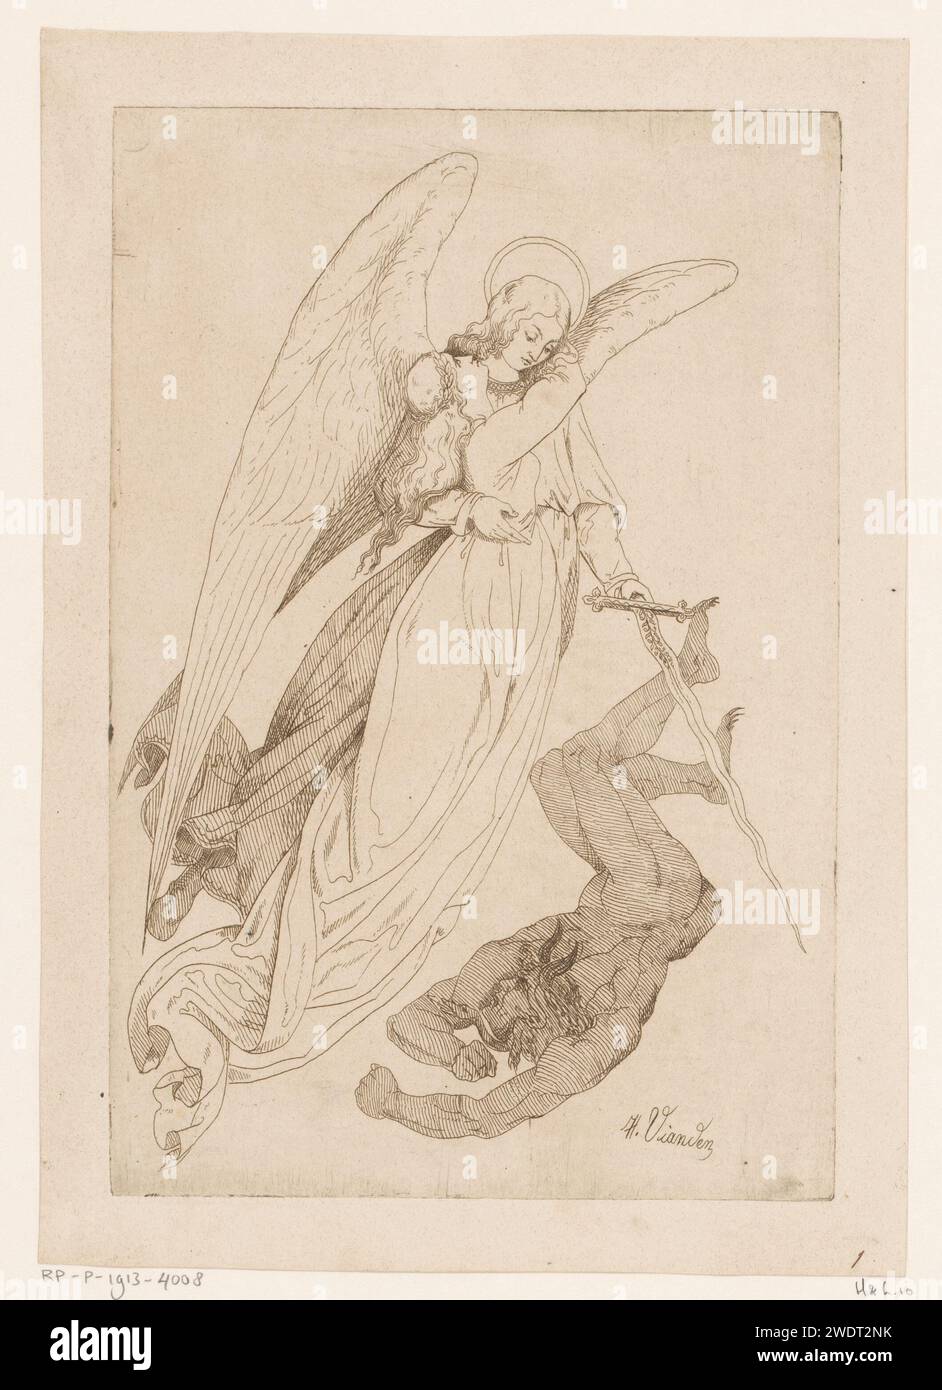 Engel lifts a female holy and beats a demon, Heinrich Vianden, 1836 print  Germany (possibly) paper etching angels fighting against other evil powers. devil(s) and demons. gripping someone by other parts of the body Stock Photo